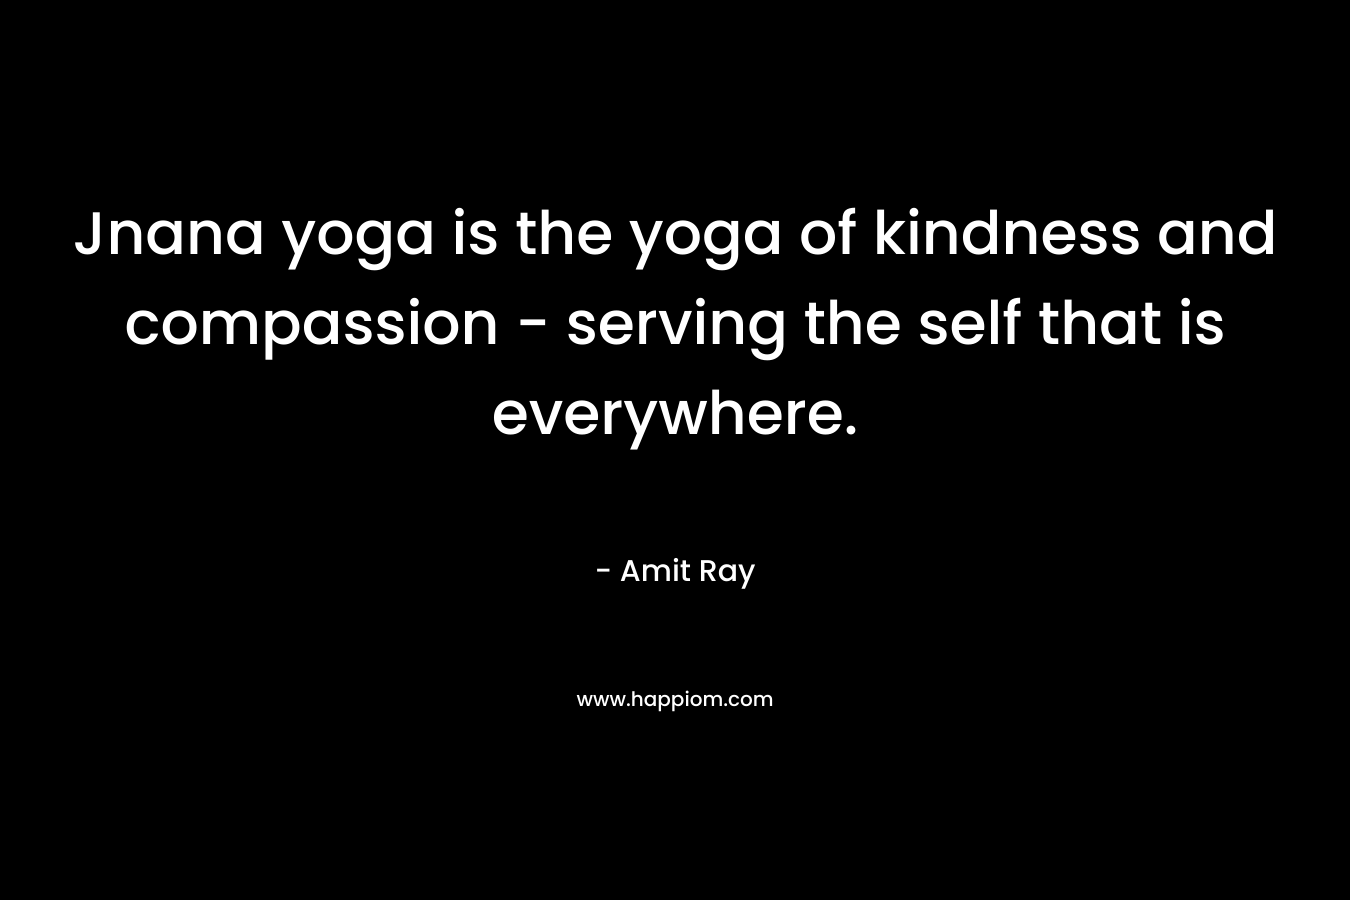 Jnana yoga is the yoga of kindness and compassion - serving the self that is everywhere.